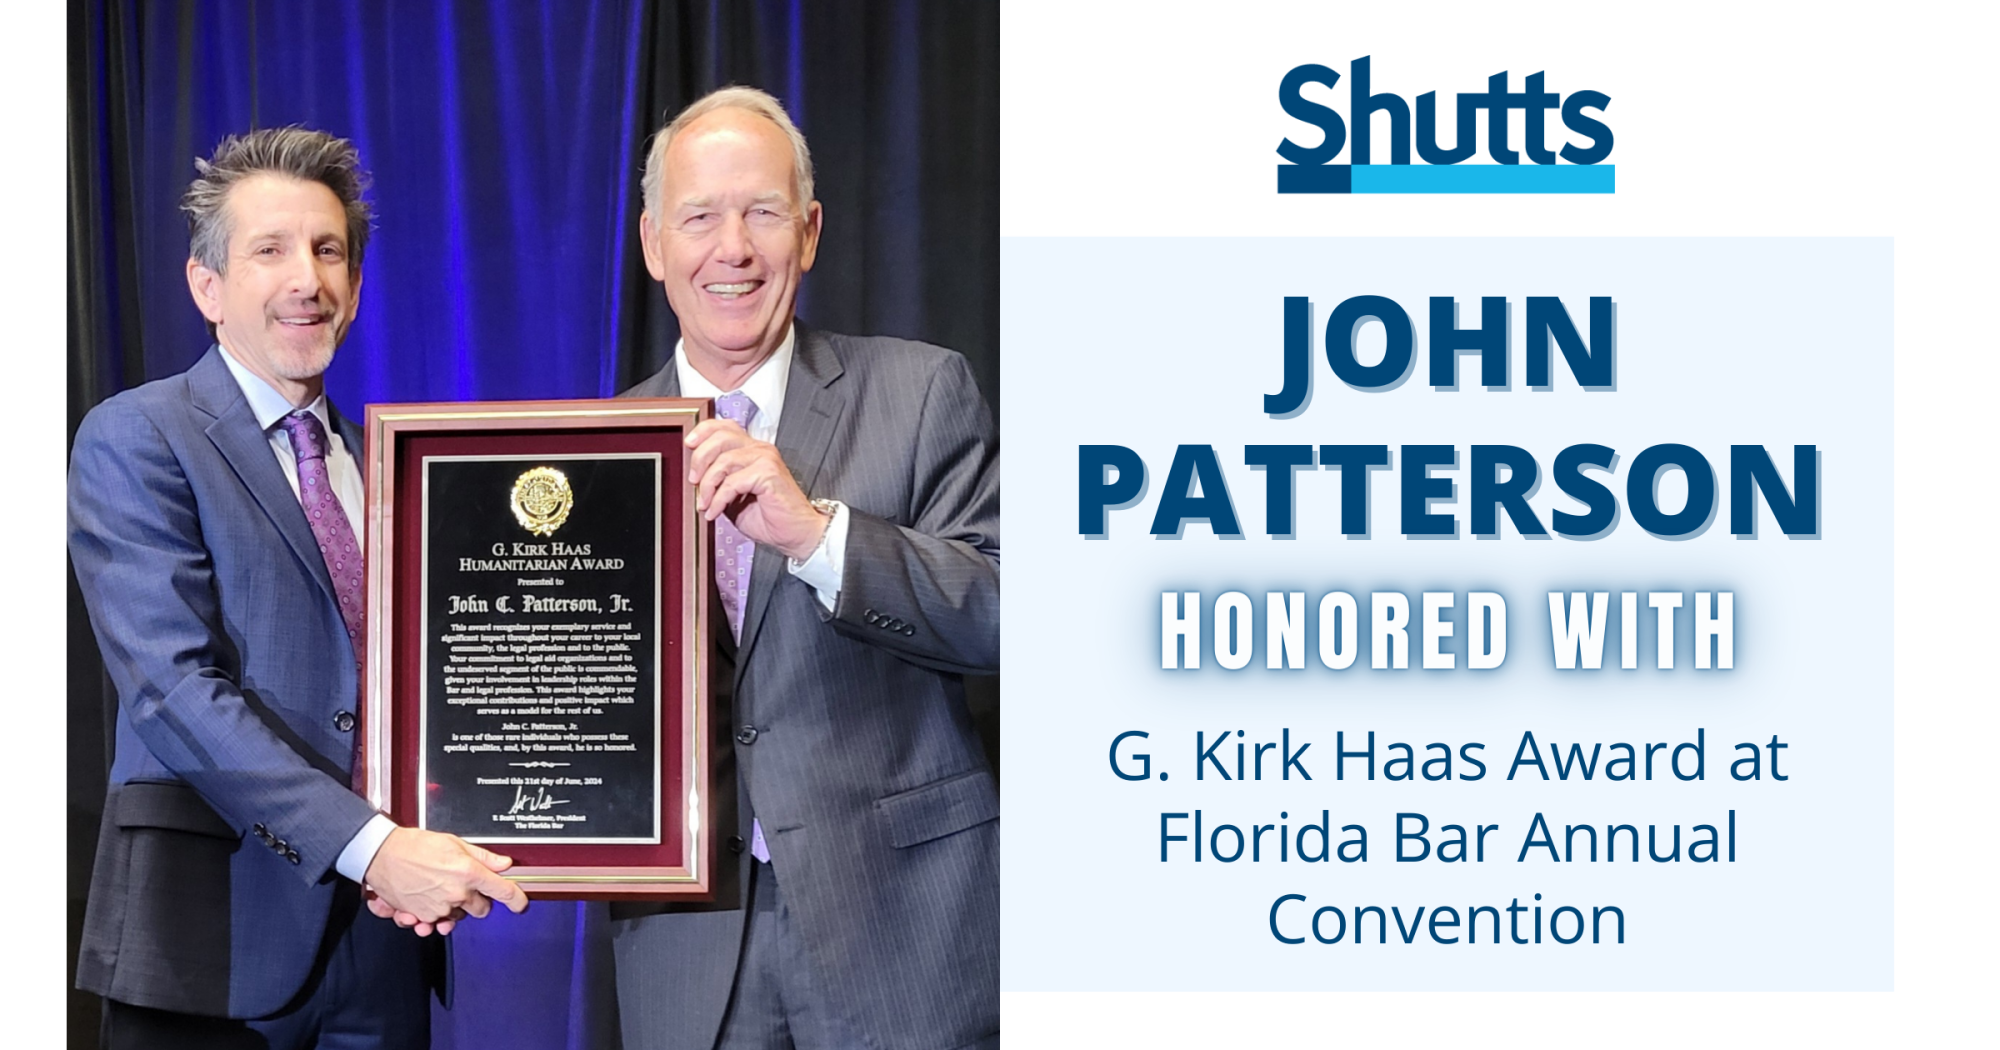 John Patterson Honored with G. Kirk Haas Award at Florida Bar Annual Convention